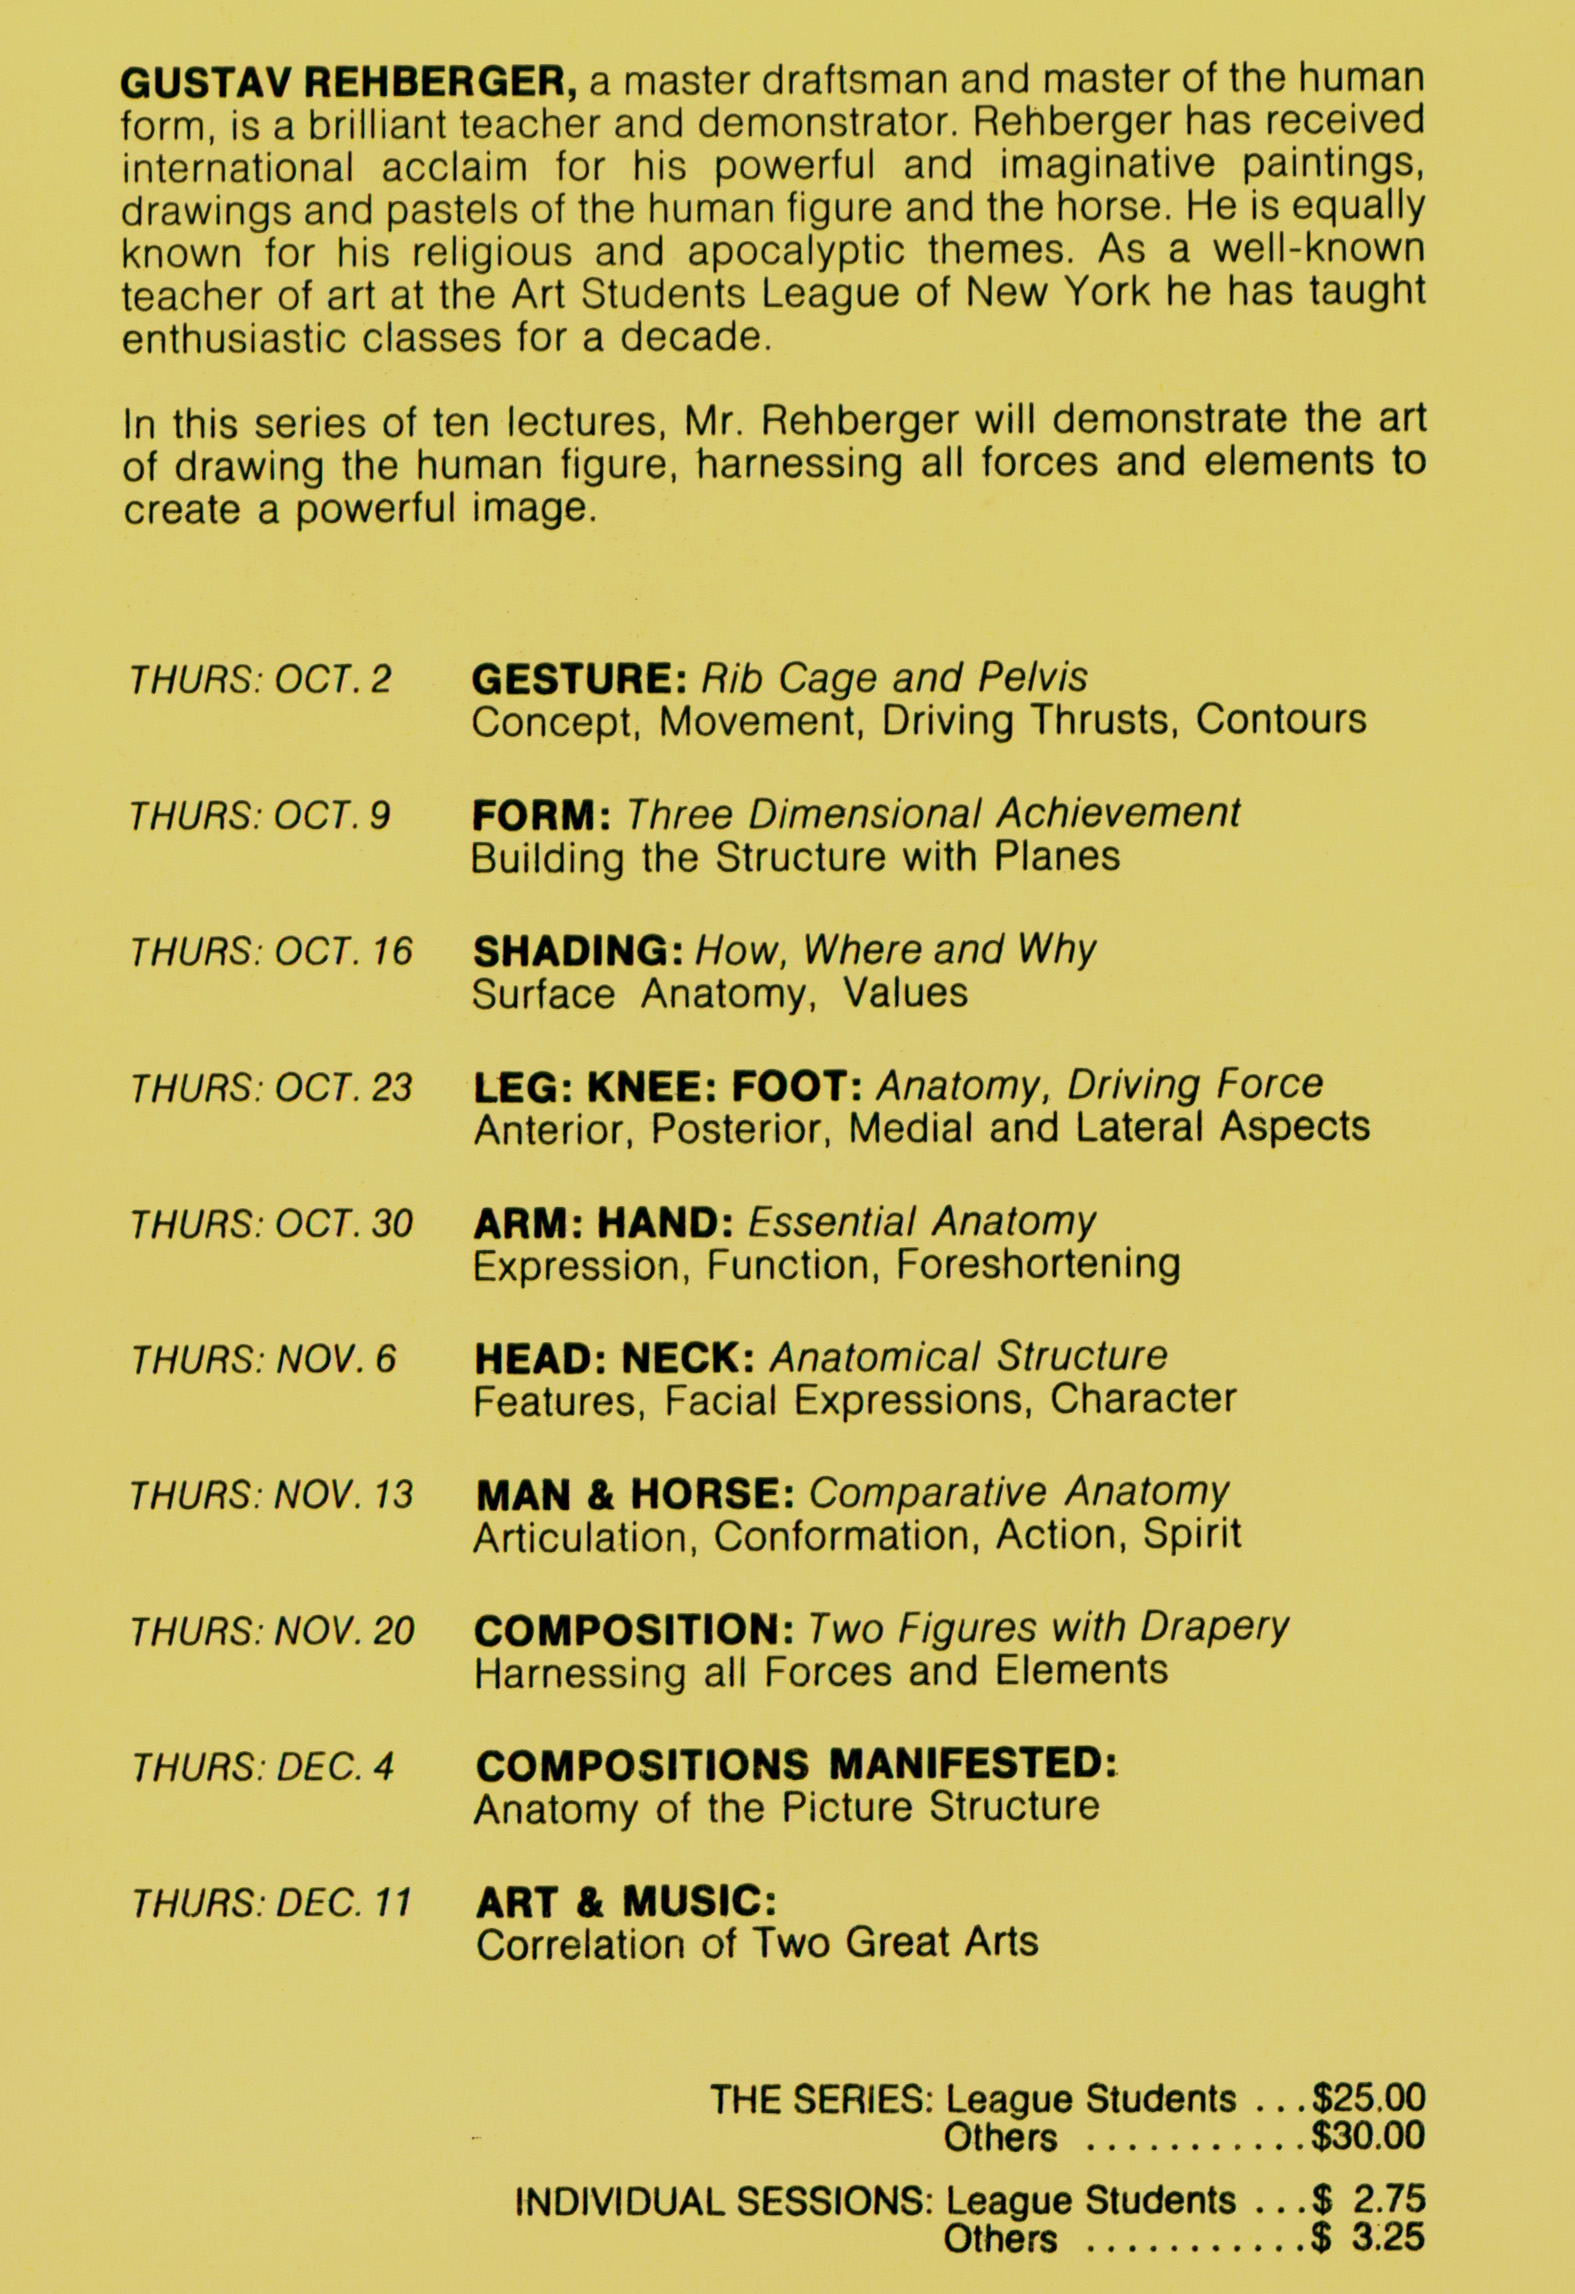 1980 Art Students League of NY Lecture Brochure #1a.JPG